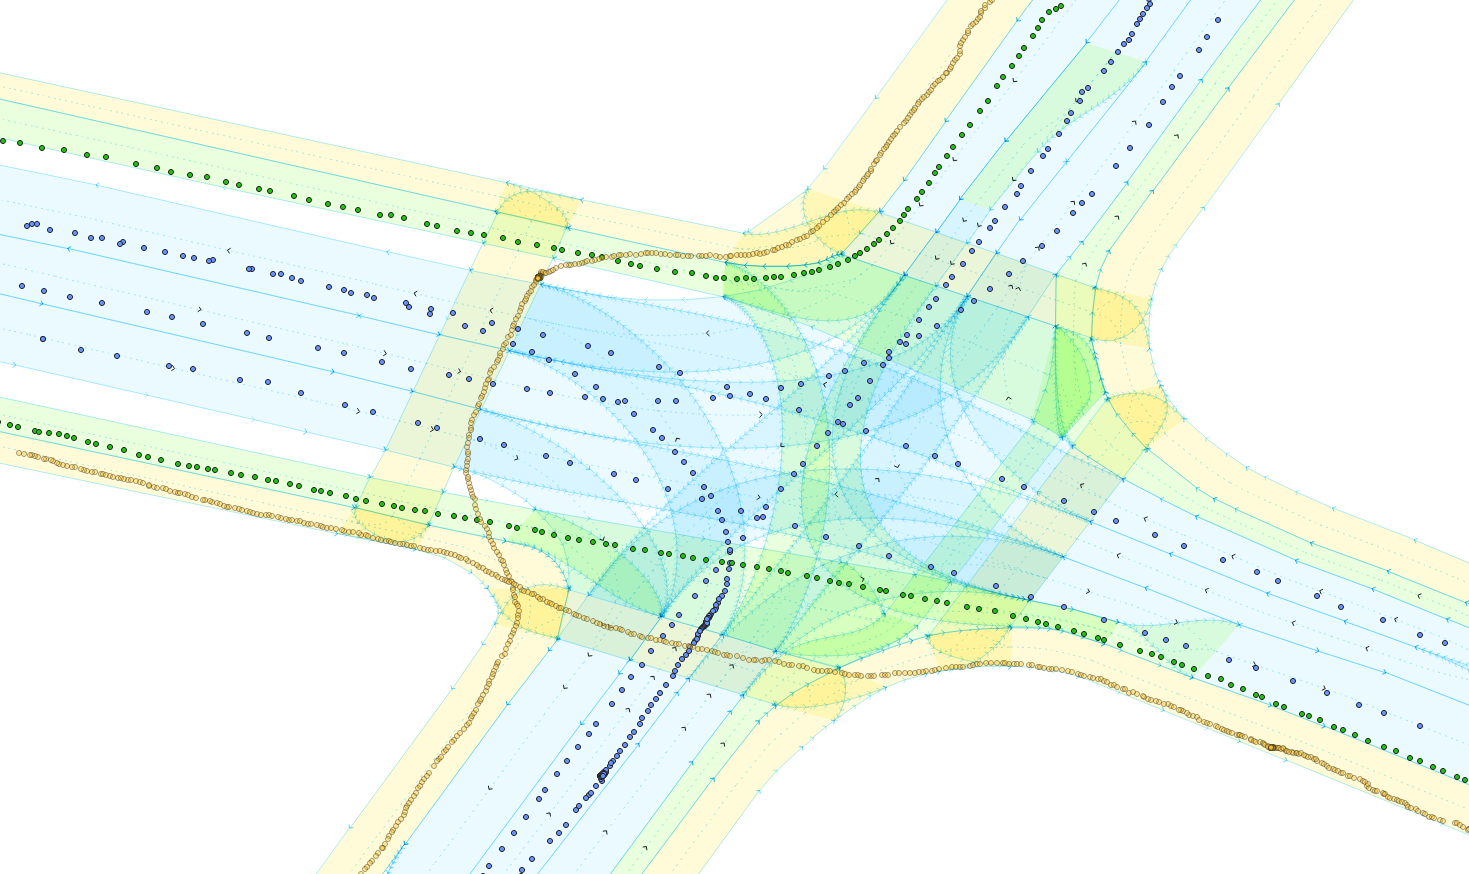 A sample of trajectories from the LiDAR system with our lane-accurate digital map in the background. Blue = vehicle, green = cyclist, yellow = pedestrian.